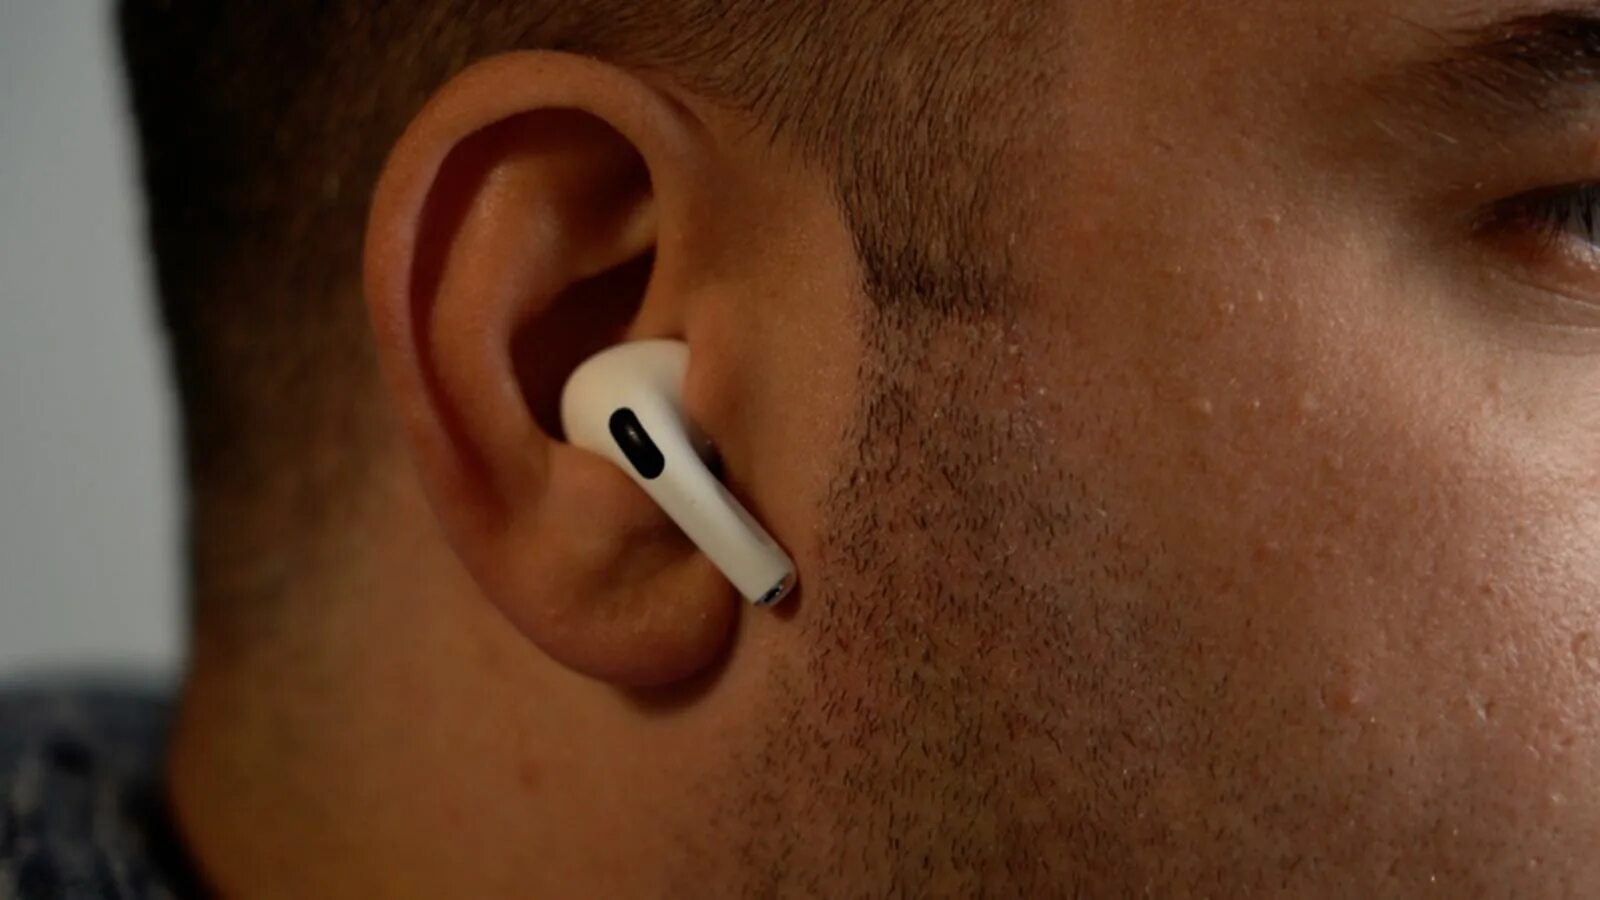 Airpods на русском языке. Наушники Apple Earpods Pro 2. Apple AIRPODS Pro. Apple AIRPODS 2 В ухе. Apple AIRPODS Pro на человеке.